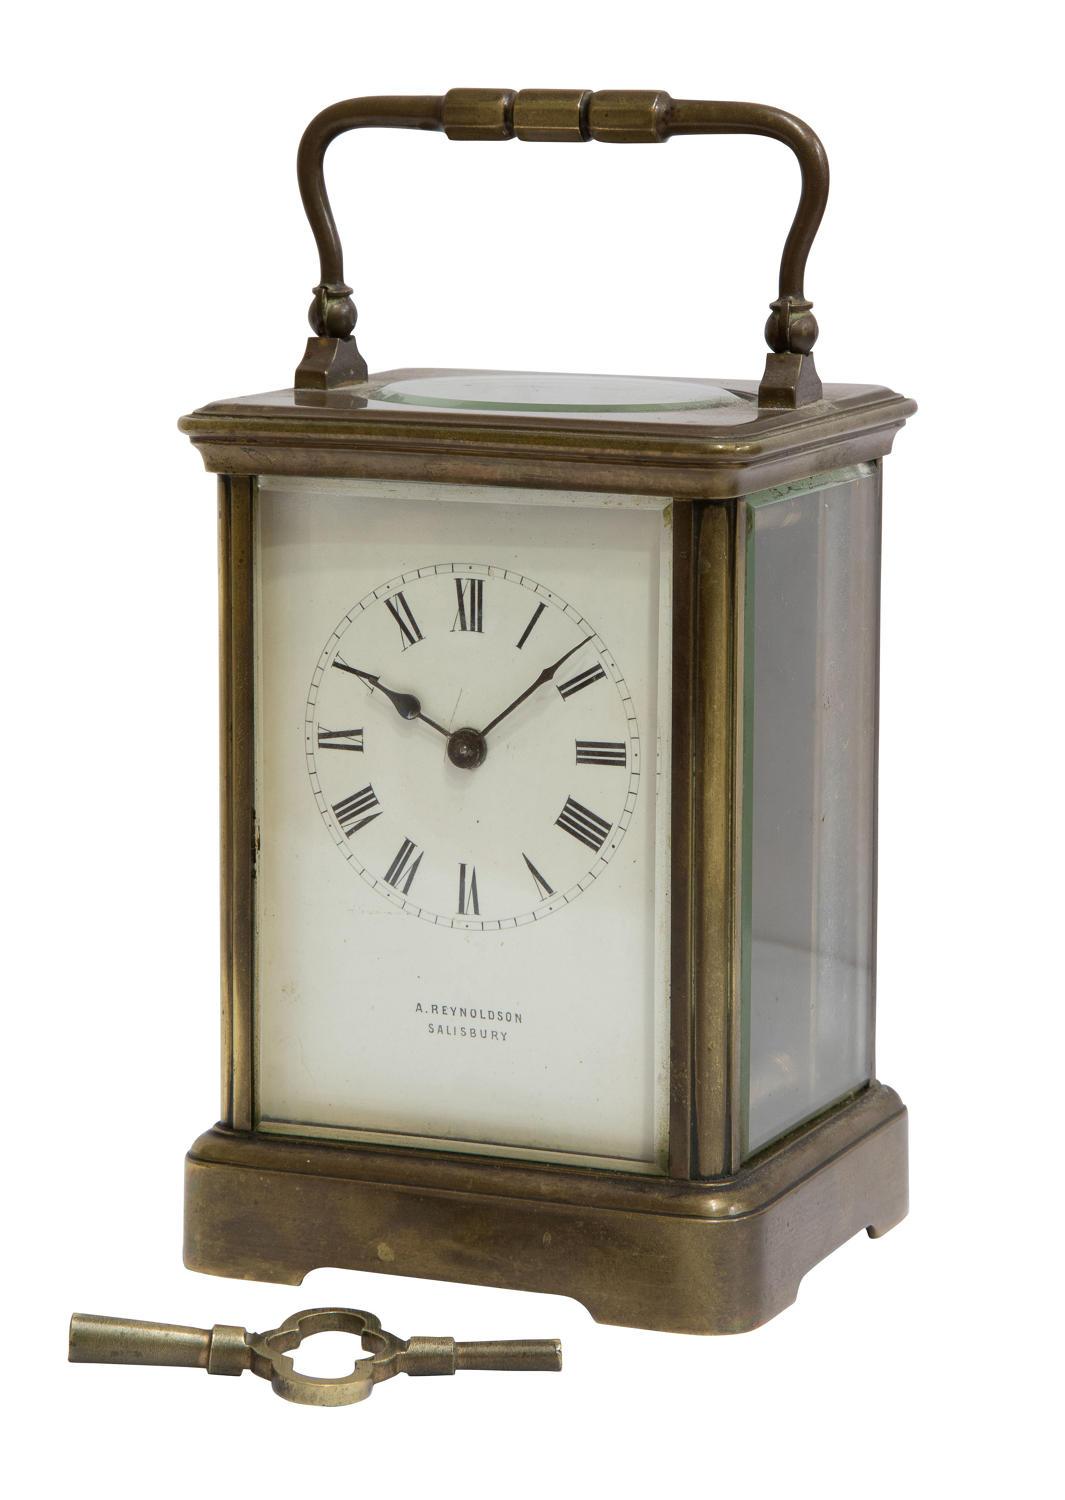 A large French carriage clock timepiece with enamel dial retailed by A. Reynoldson, Salisbury,

circa 1900.